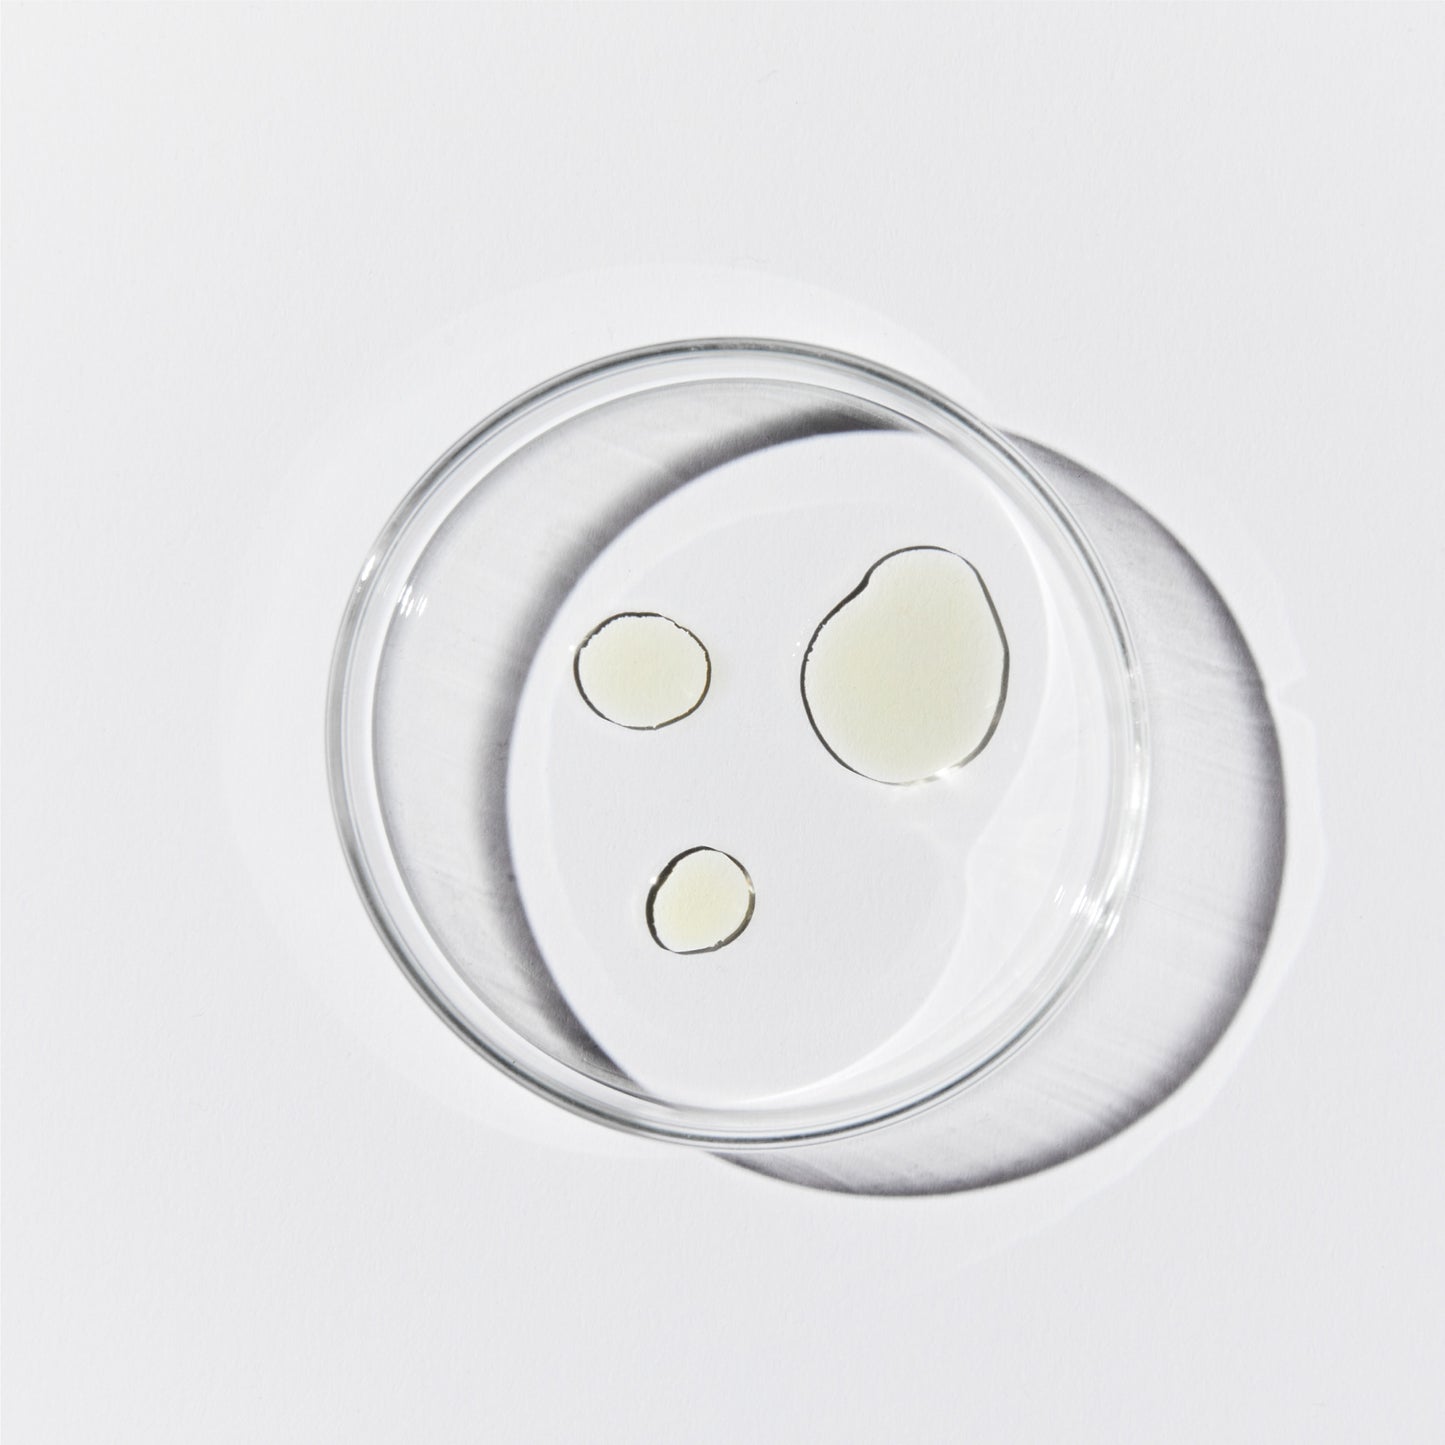 Aerial shot of a petri dish with 3 pools of translucent yellow liquid against a white background.